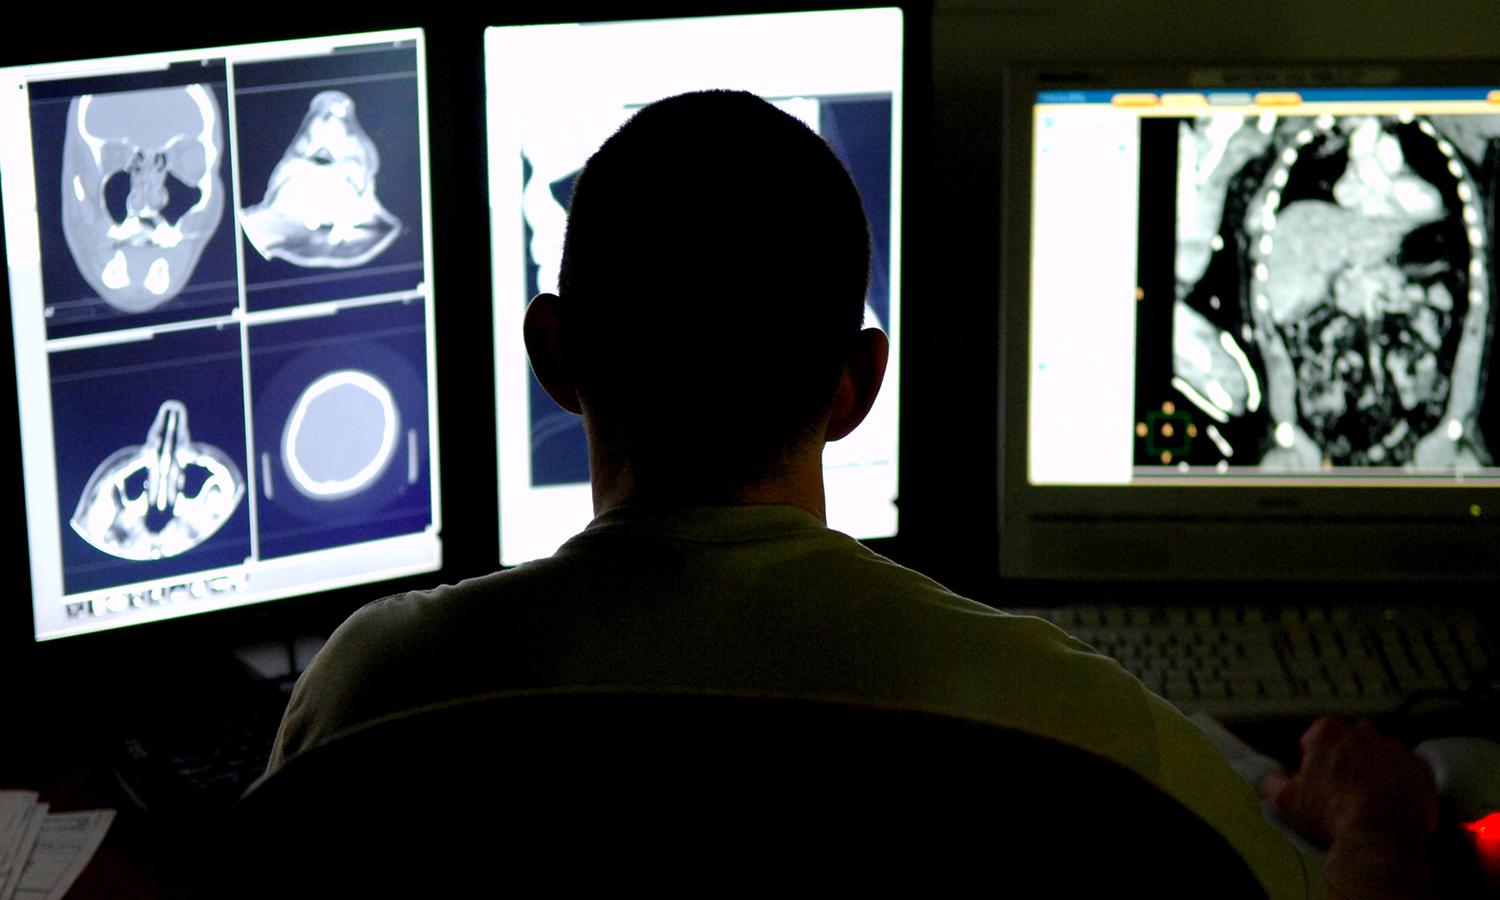 An Air Force radiologist reviews CT scans from a trauma patient.